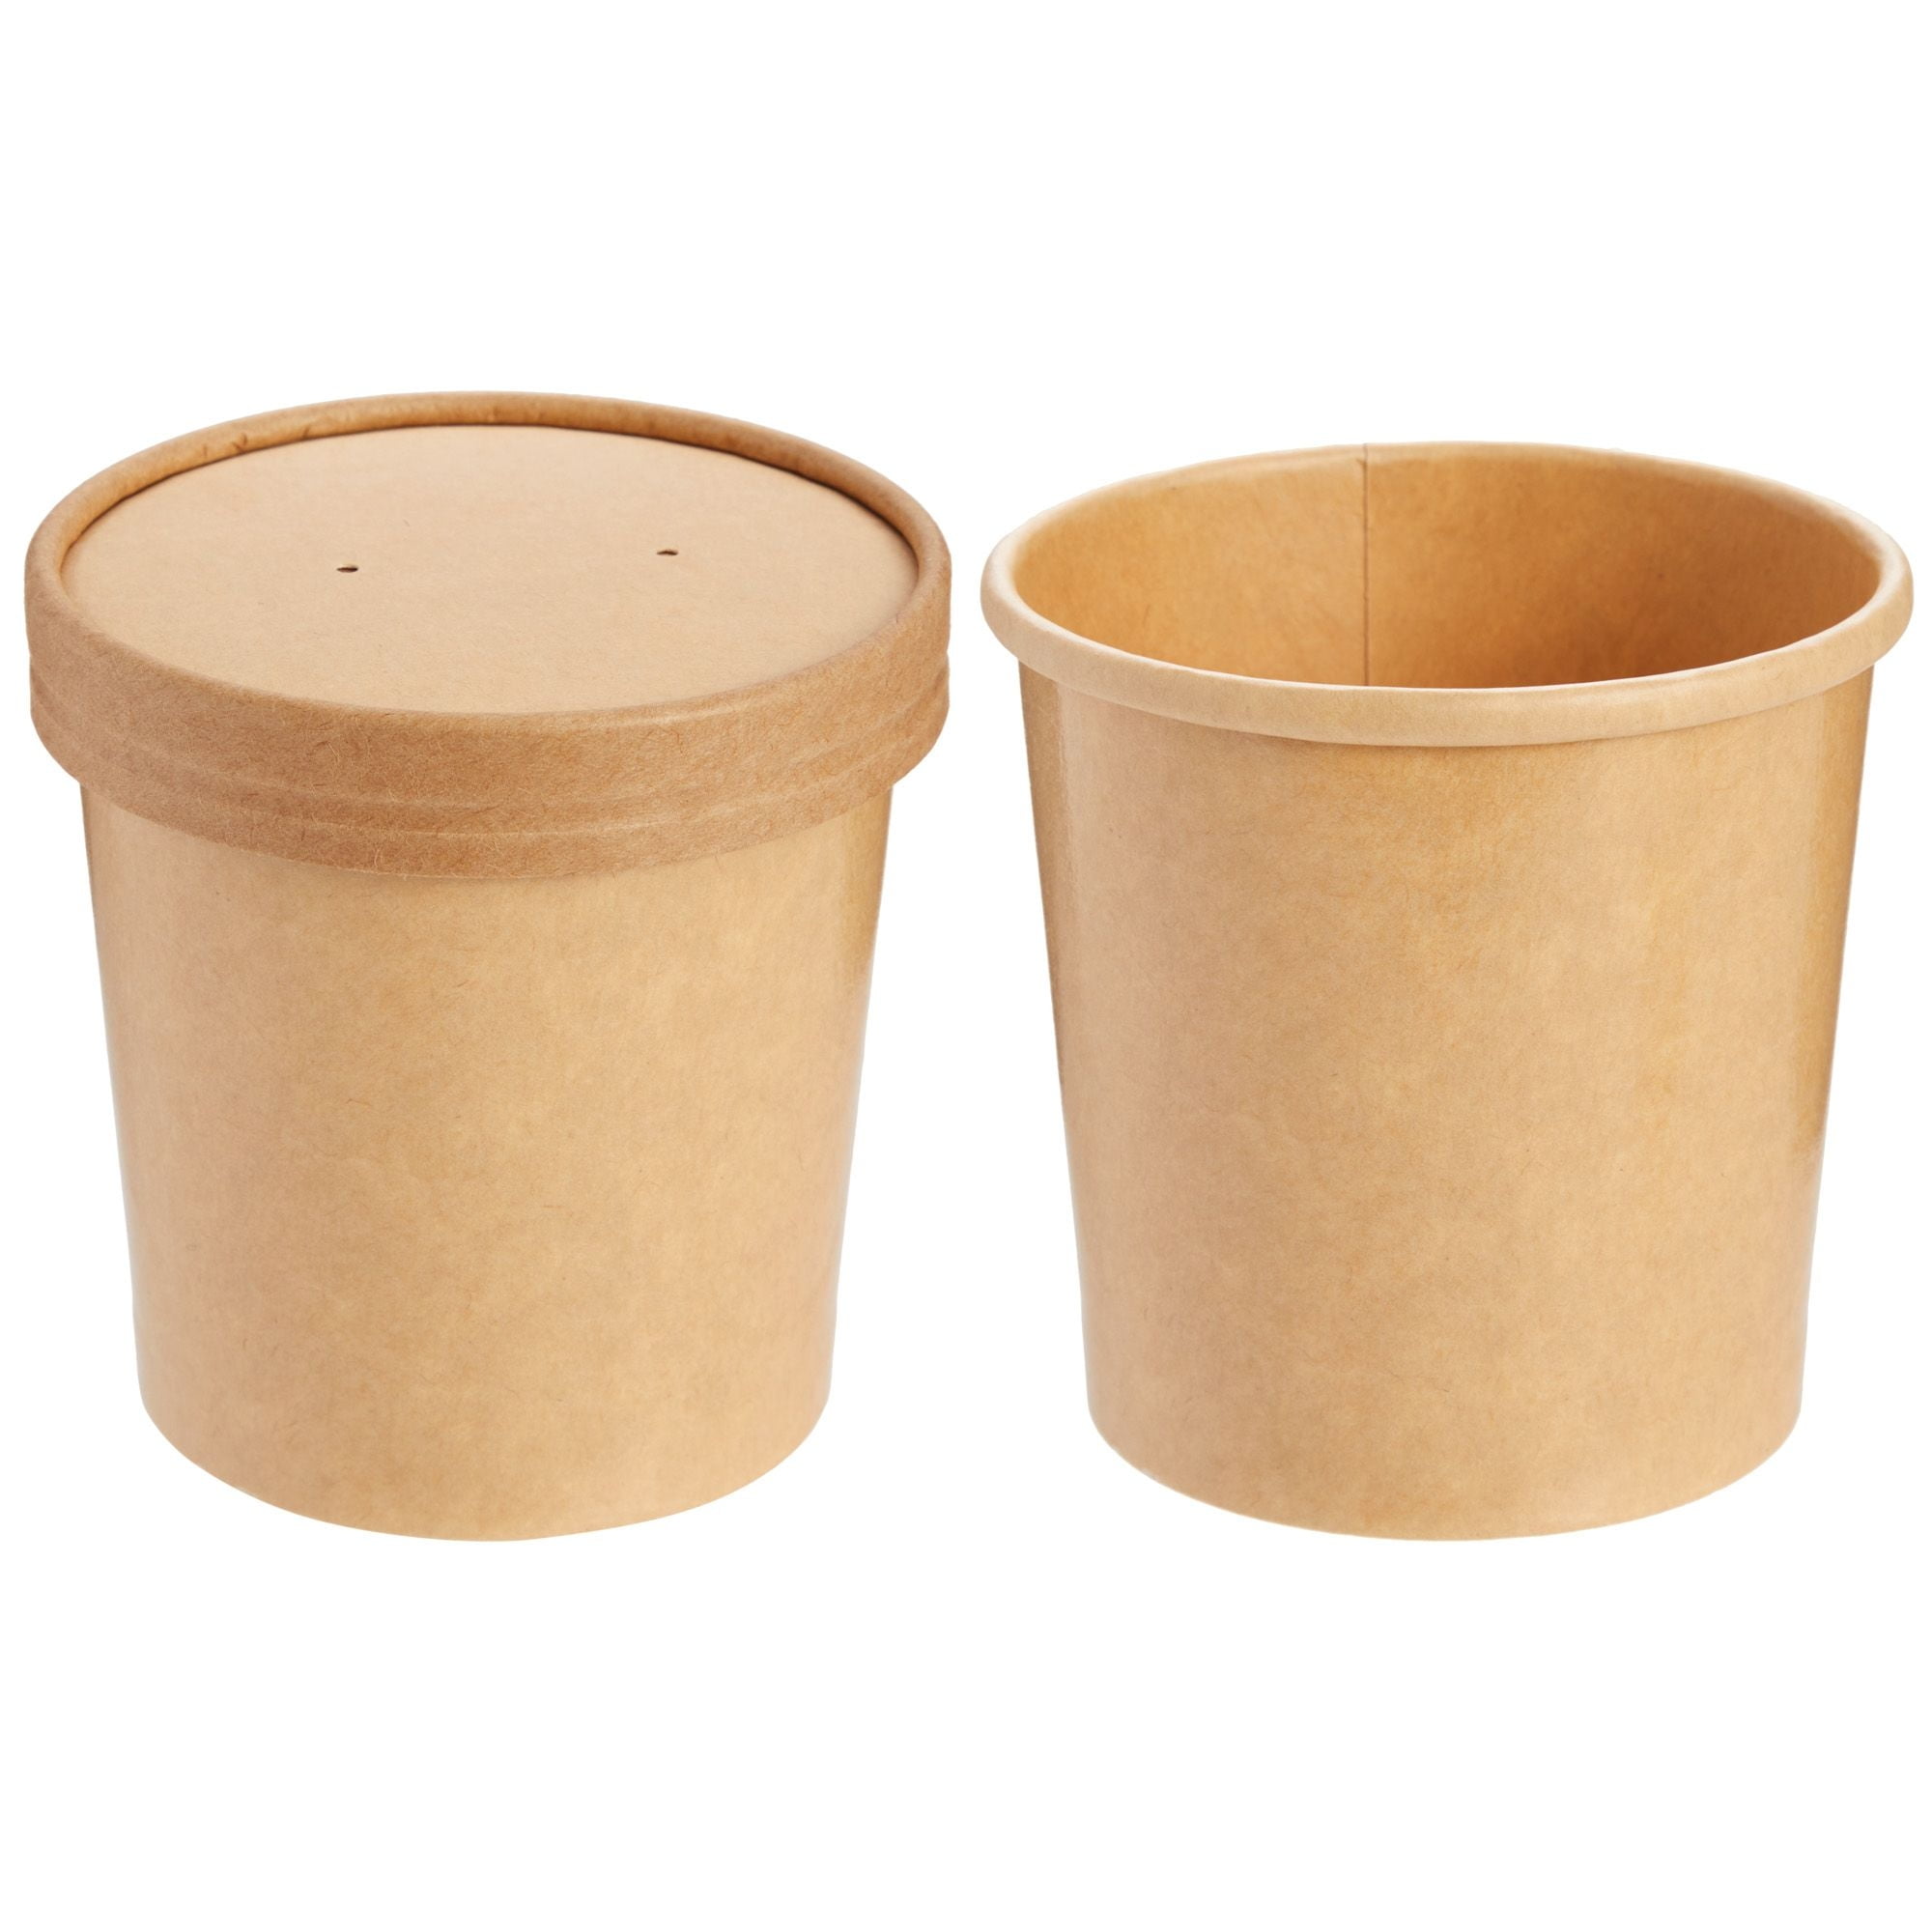  Smygoods 12oz Paper Soup Containers With Lids